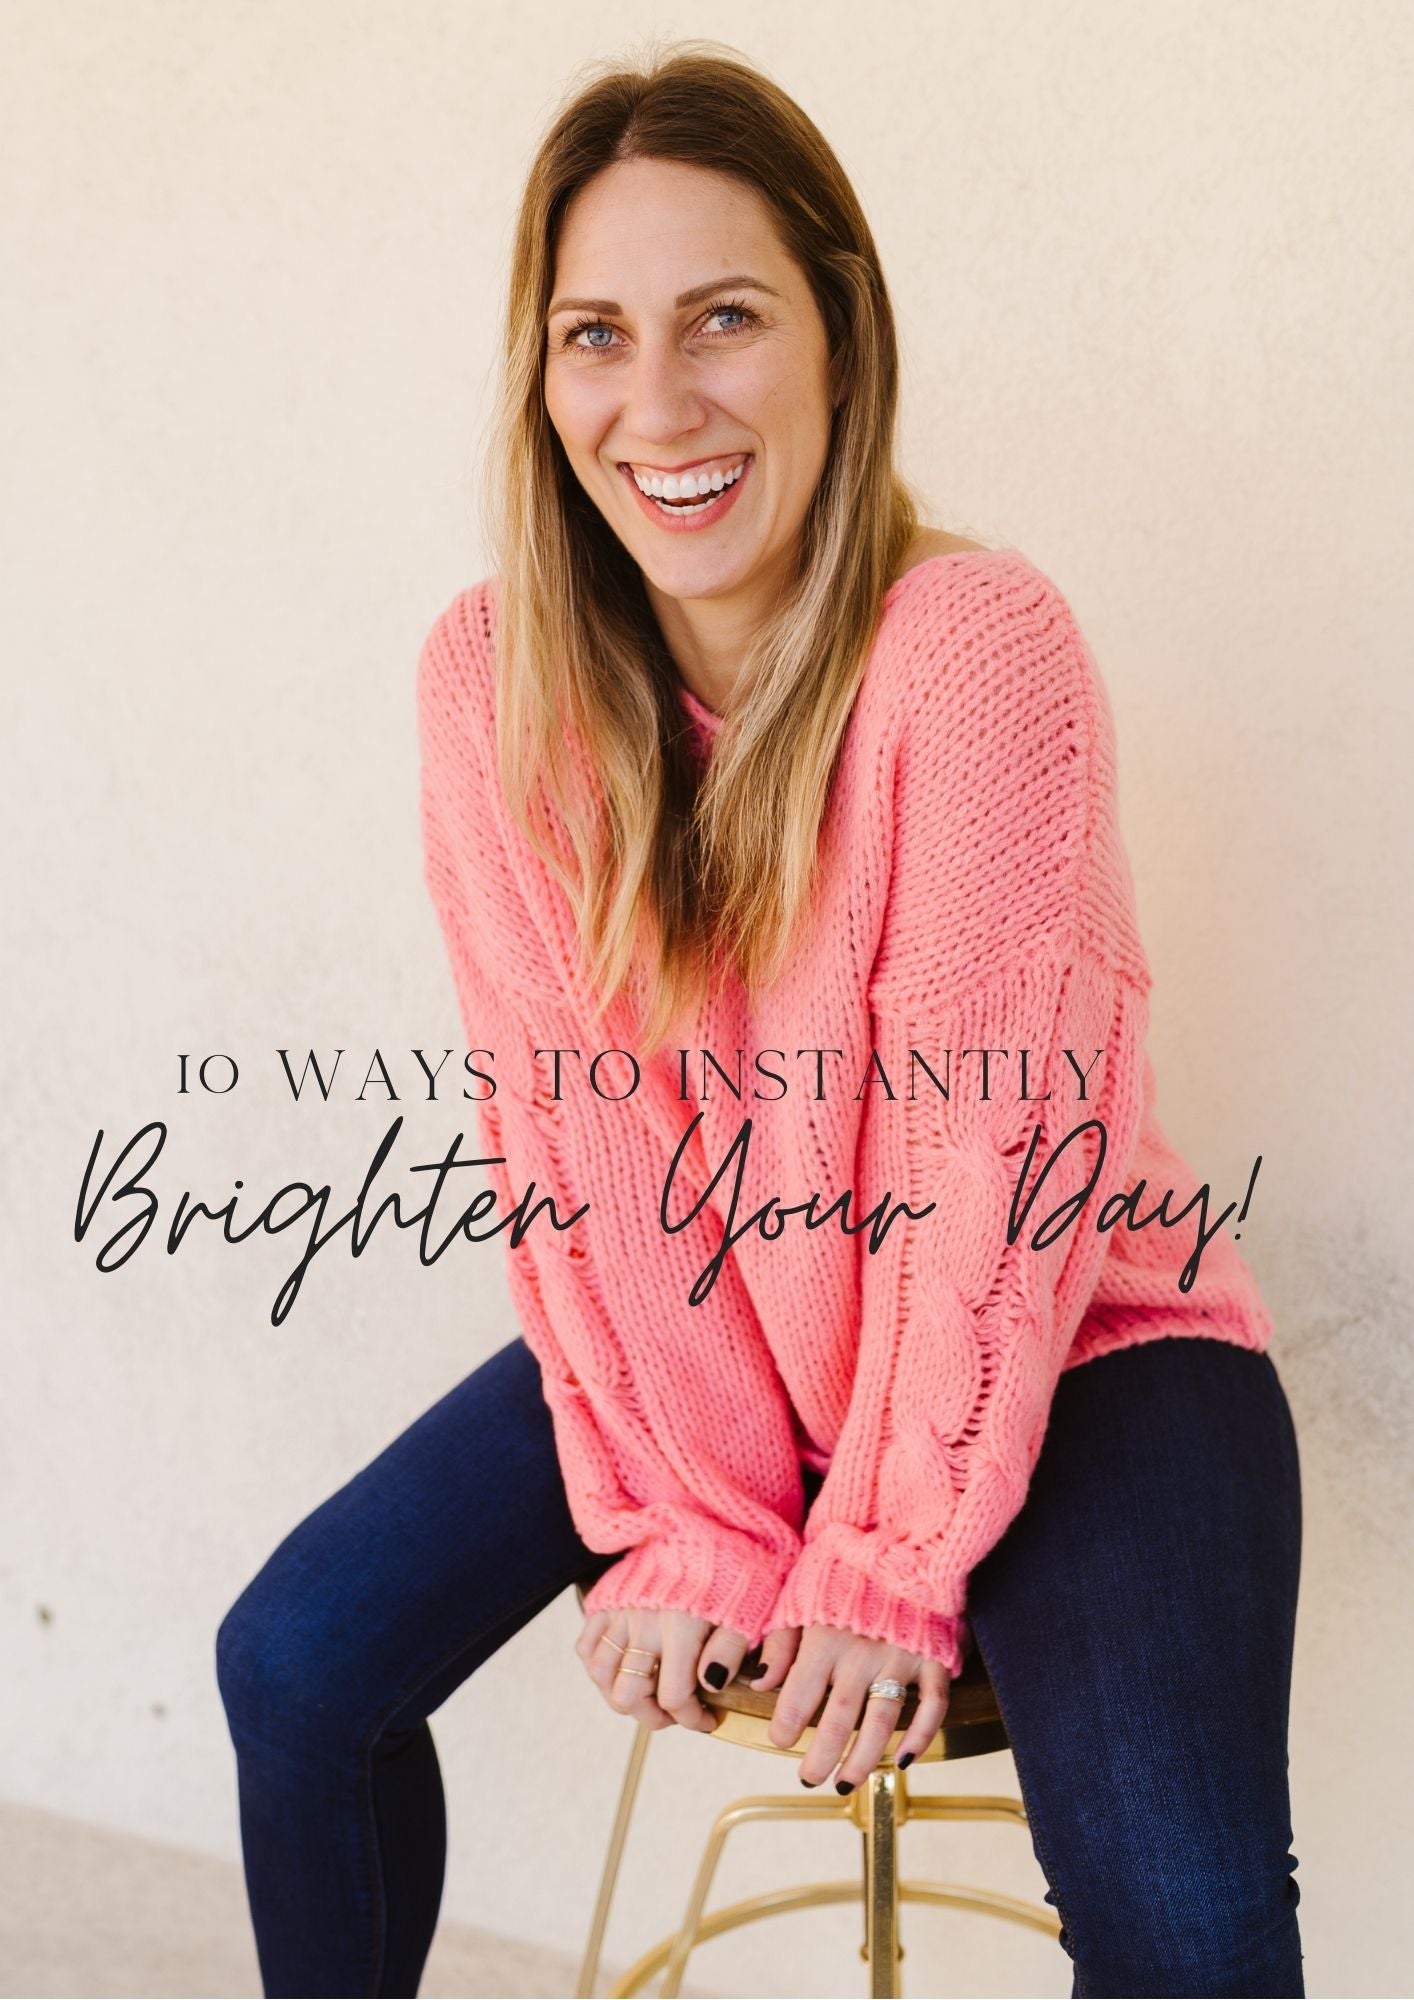 10 Easy Ways to Instantly Brighten Your Day!